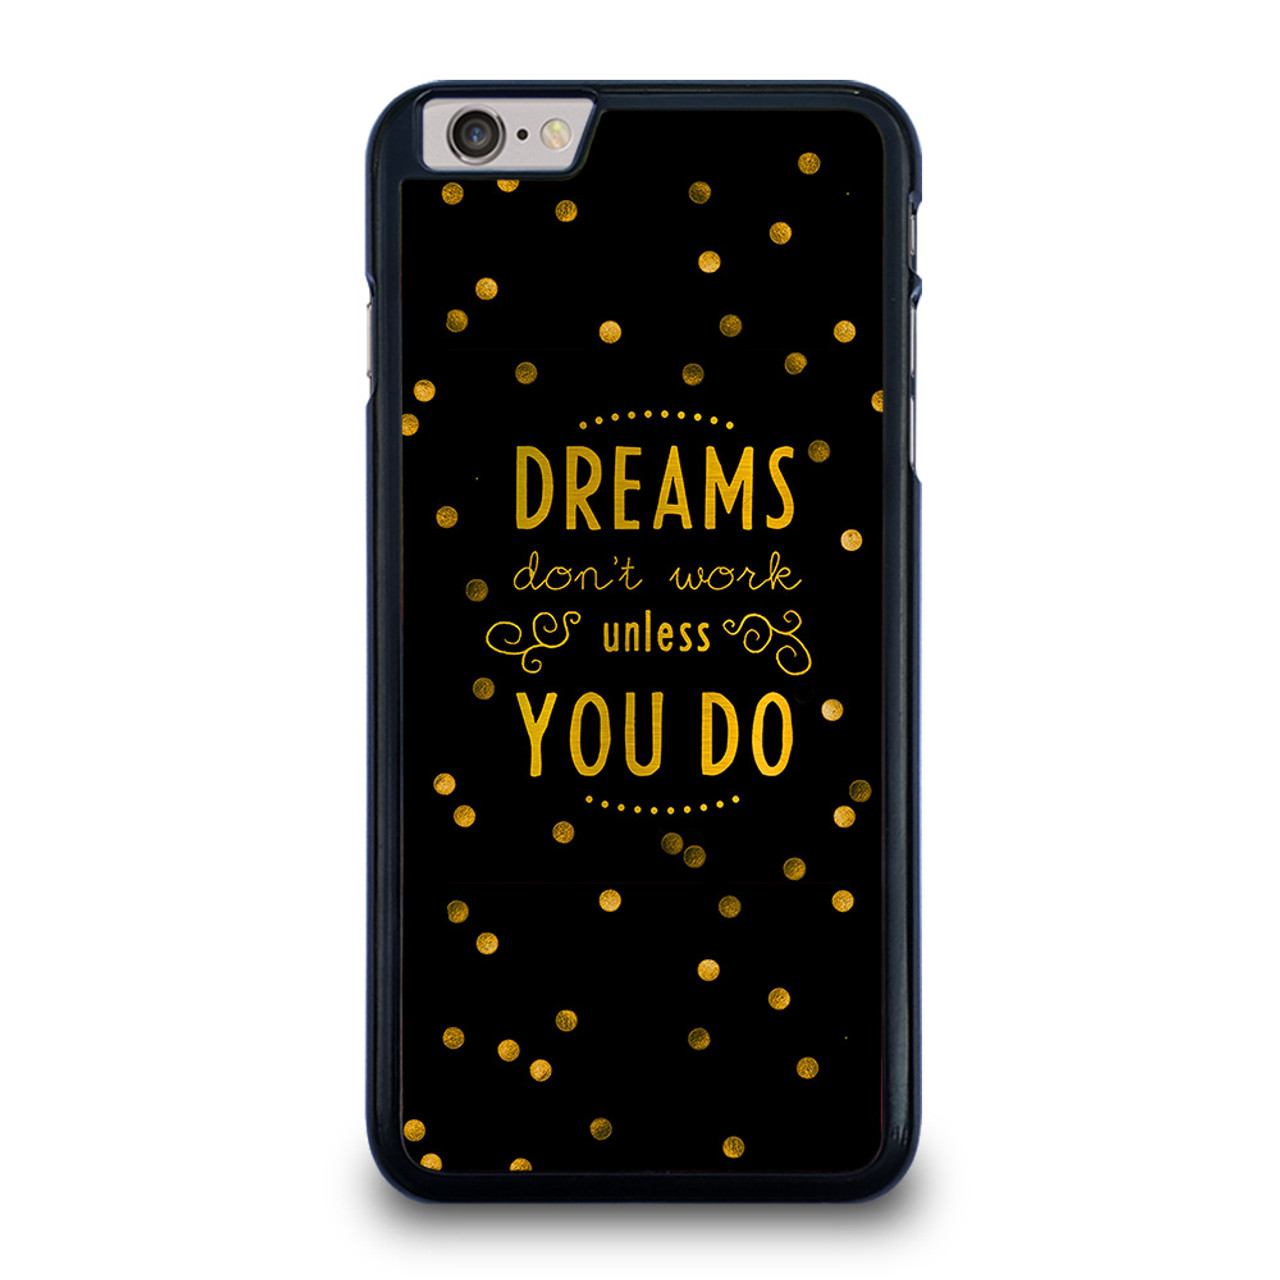 KATE SPADE QUOTE iPhone 6 / 6S Plus Case Cover